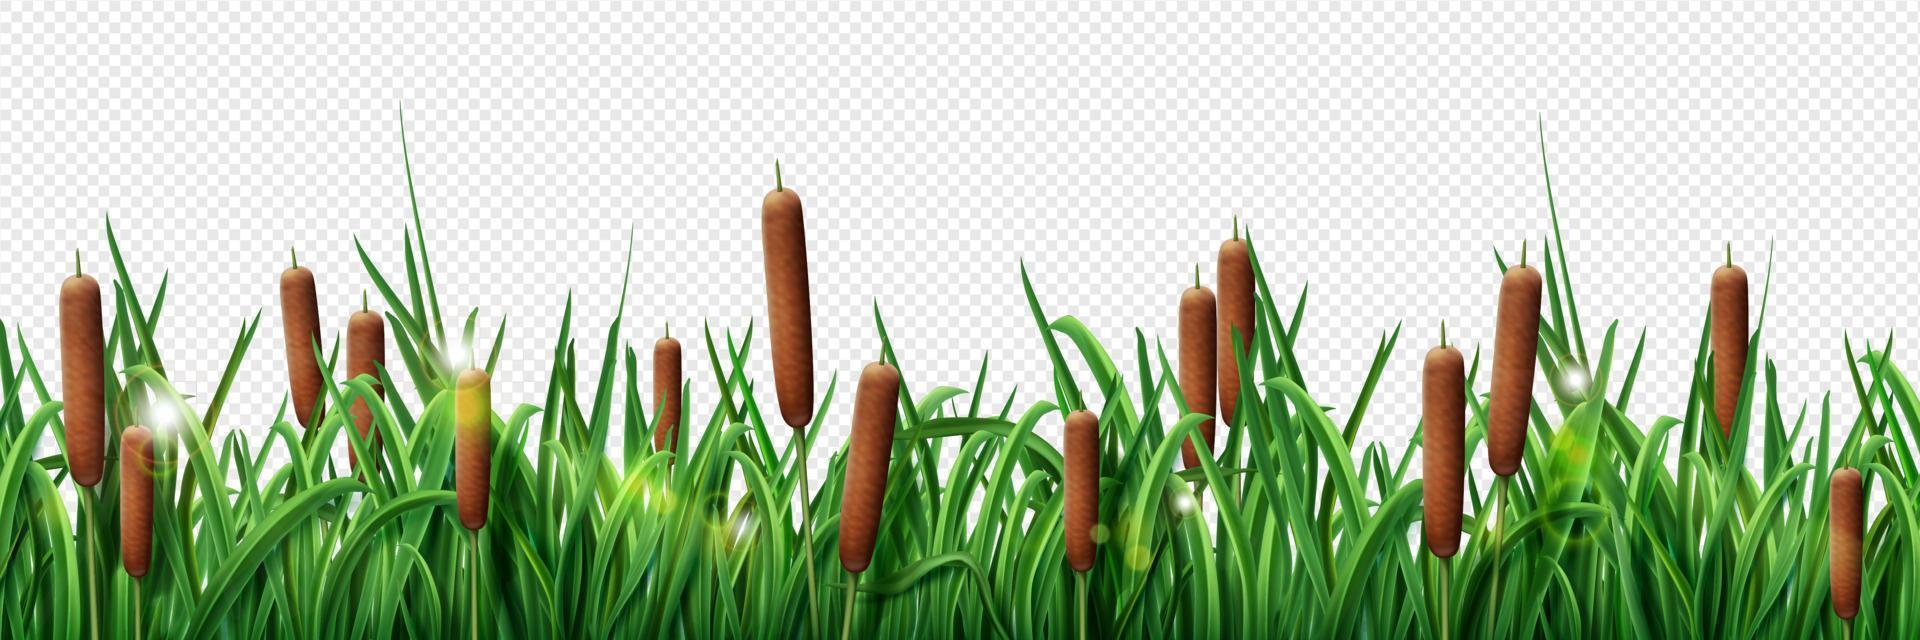 Realistic green grass border and brown reed border vector